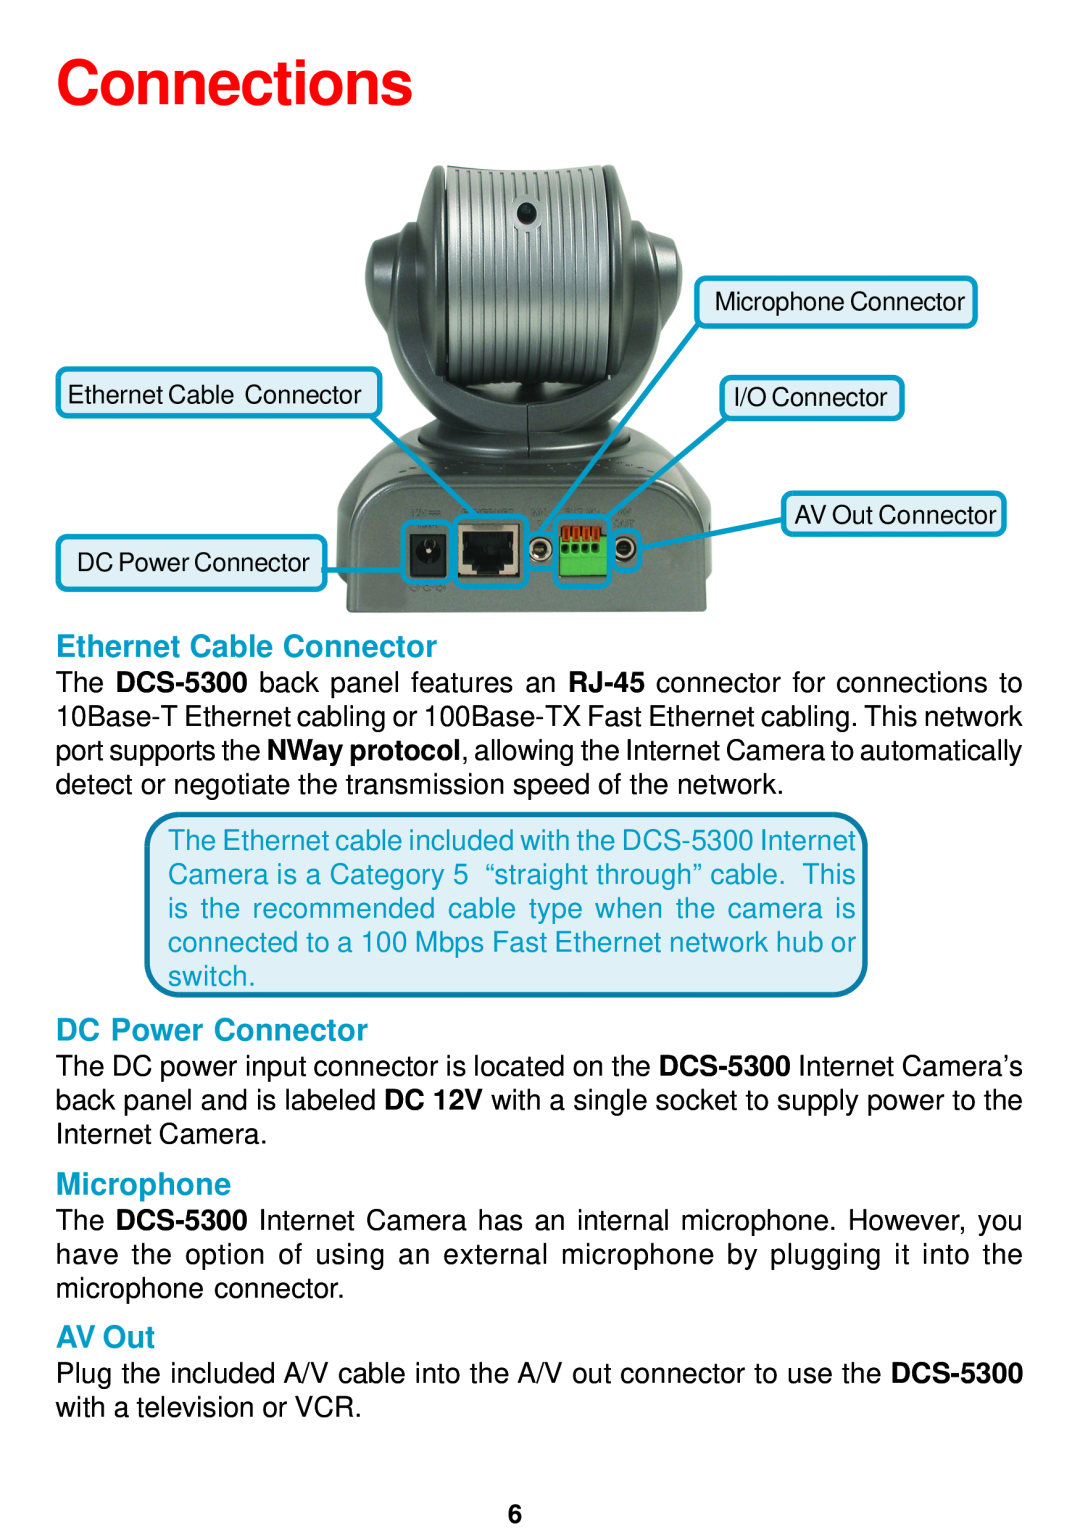 D-Link DCS-5300 manual Connections, Ethernet Cable Connector, DC Power Connector, Microphone, AV Out 